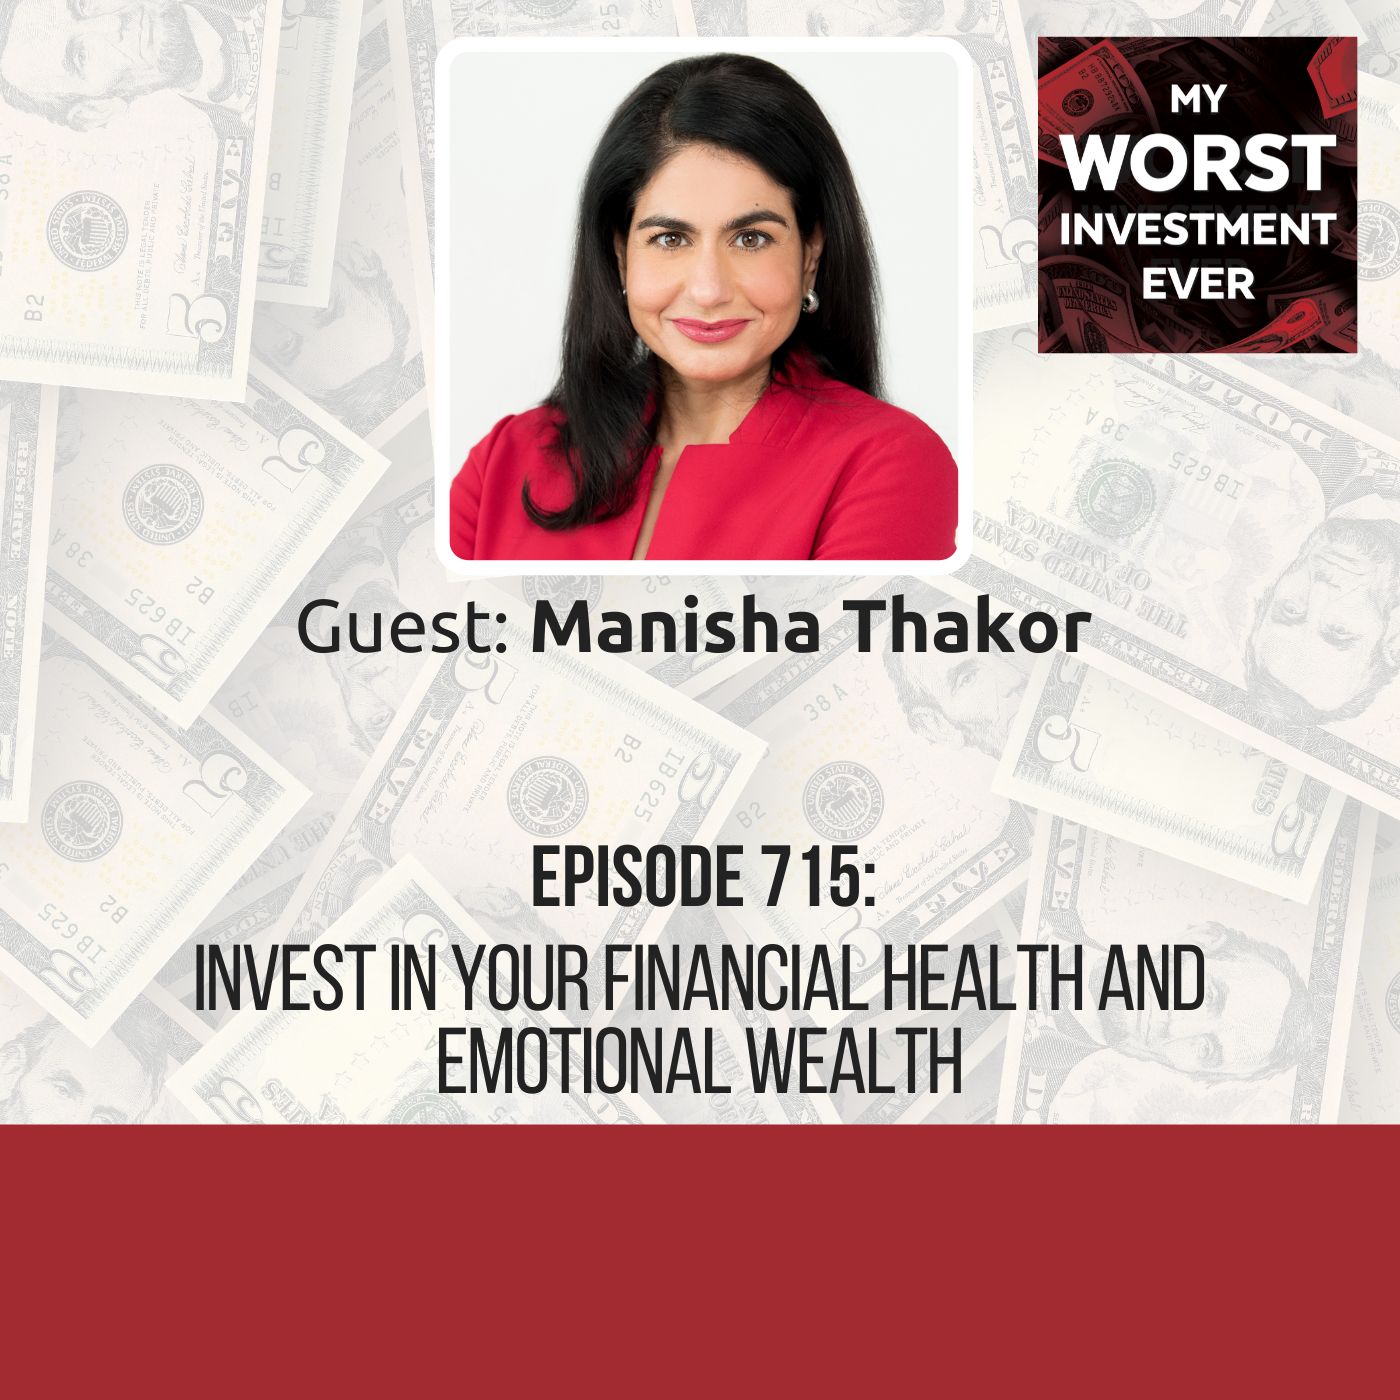 Manisha Thakor – Invest in Your Financial Health and Emotional Wealth